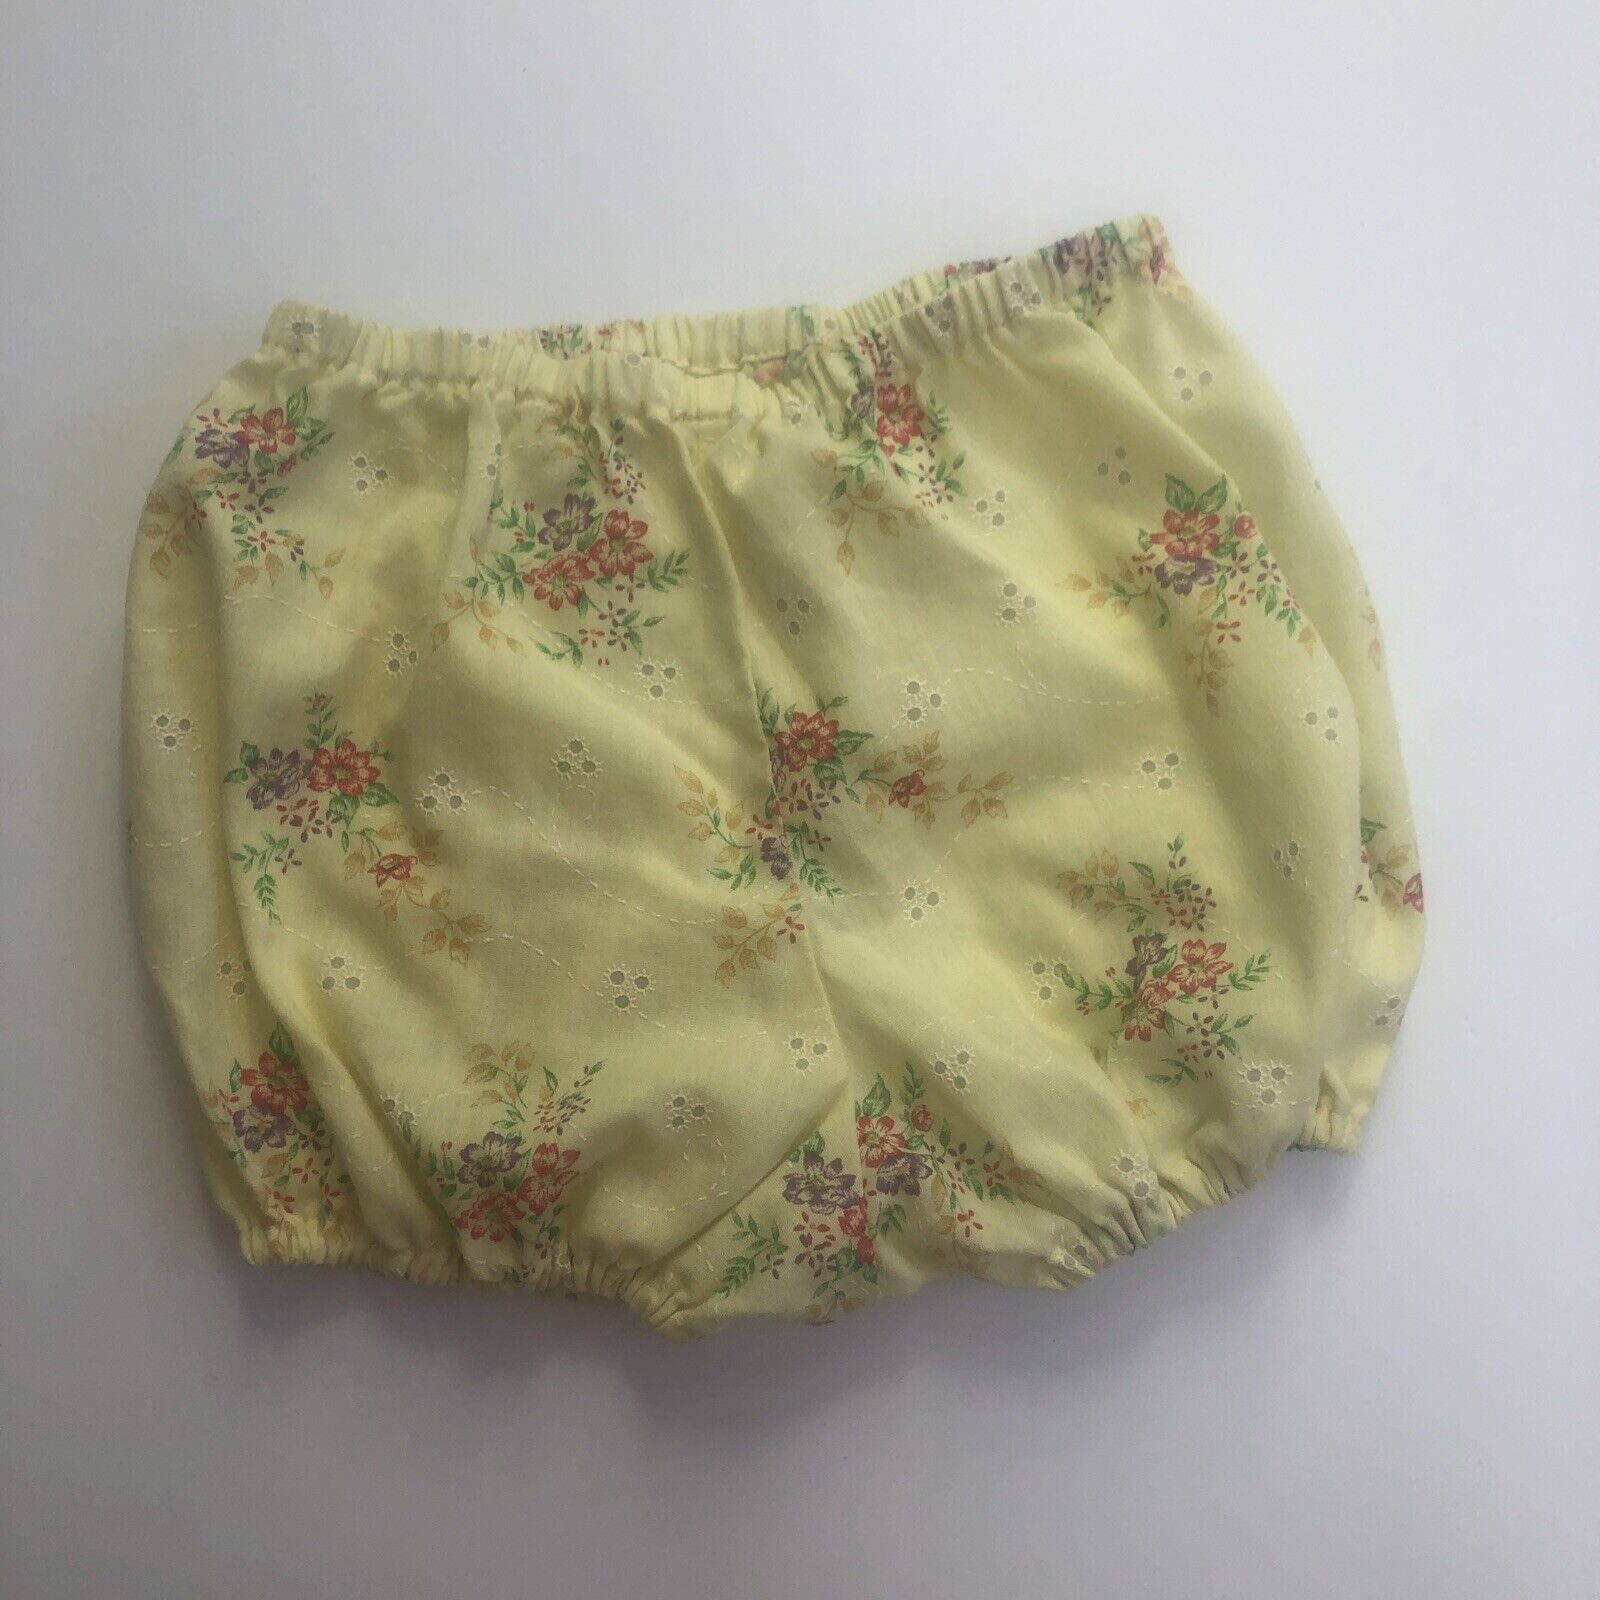 Vintage 80s Handmade Baby Diaper Cover Pants Yellow Floral Eyelet Cotton Blend